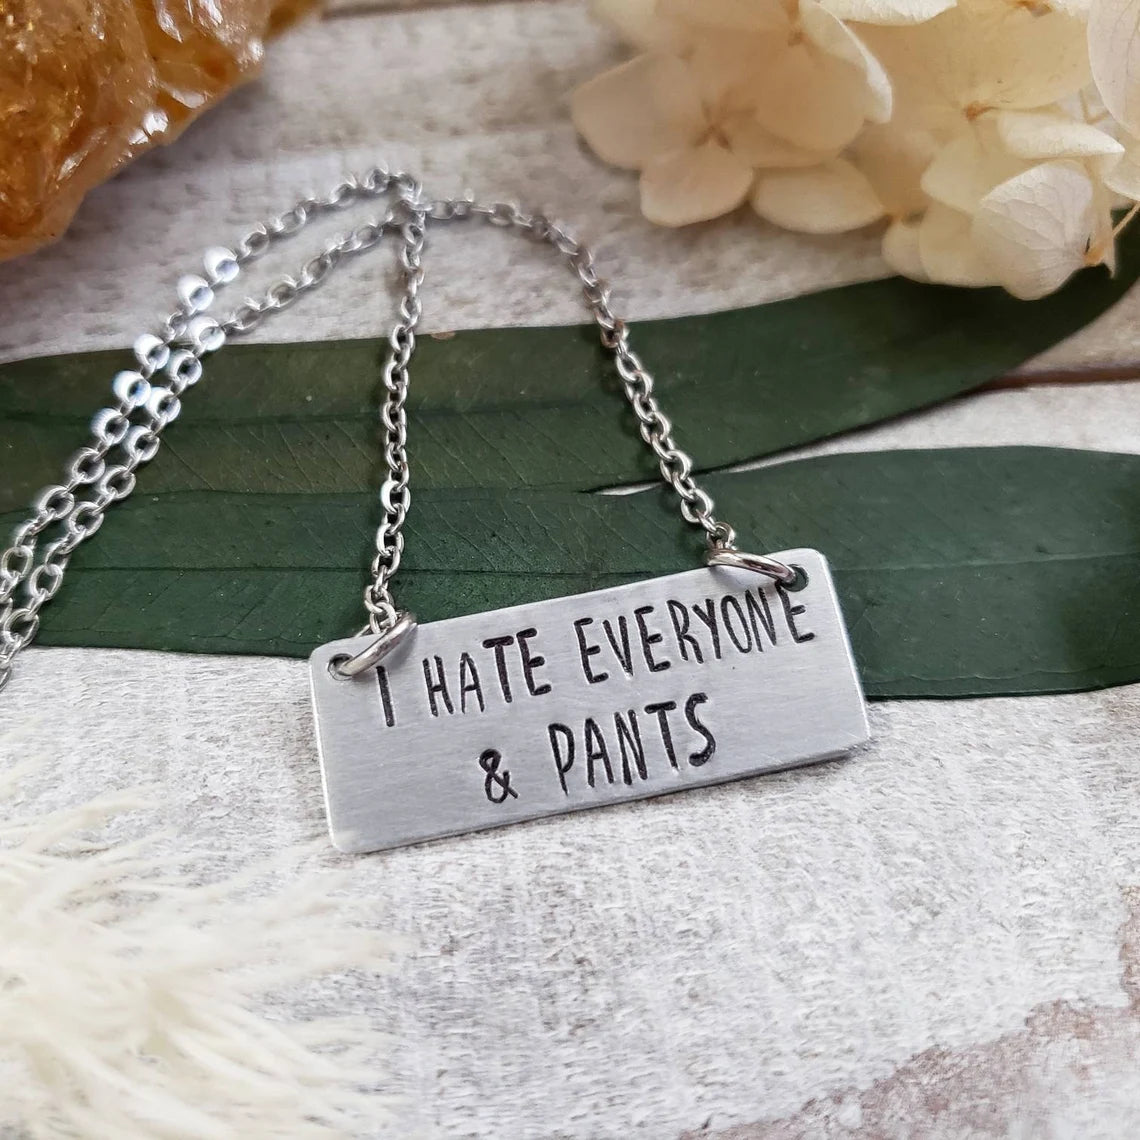 I hate everyone & pants necklace